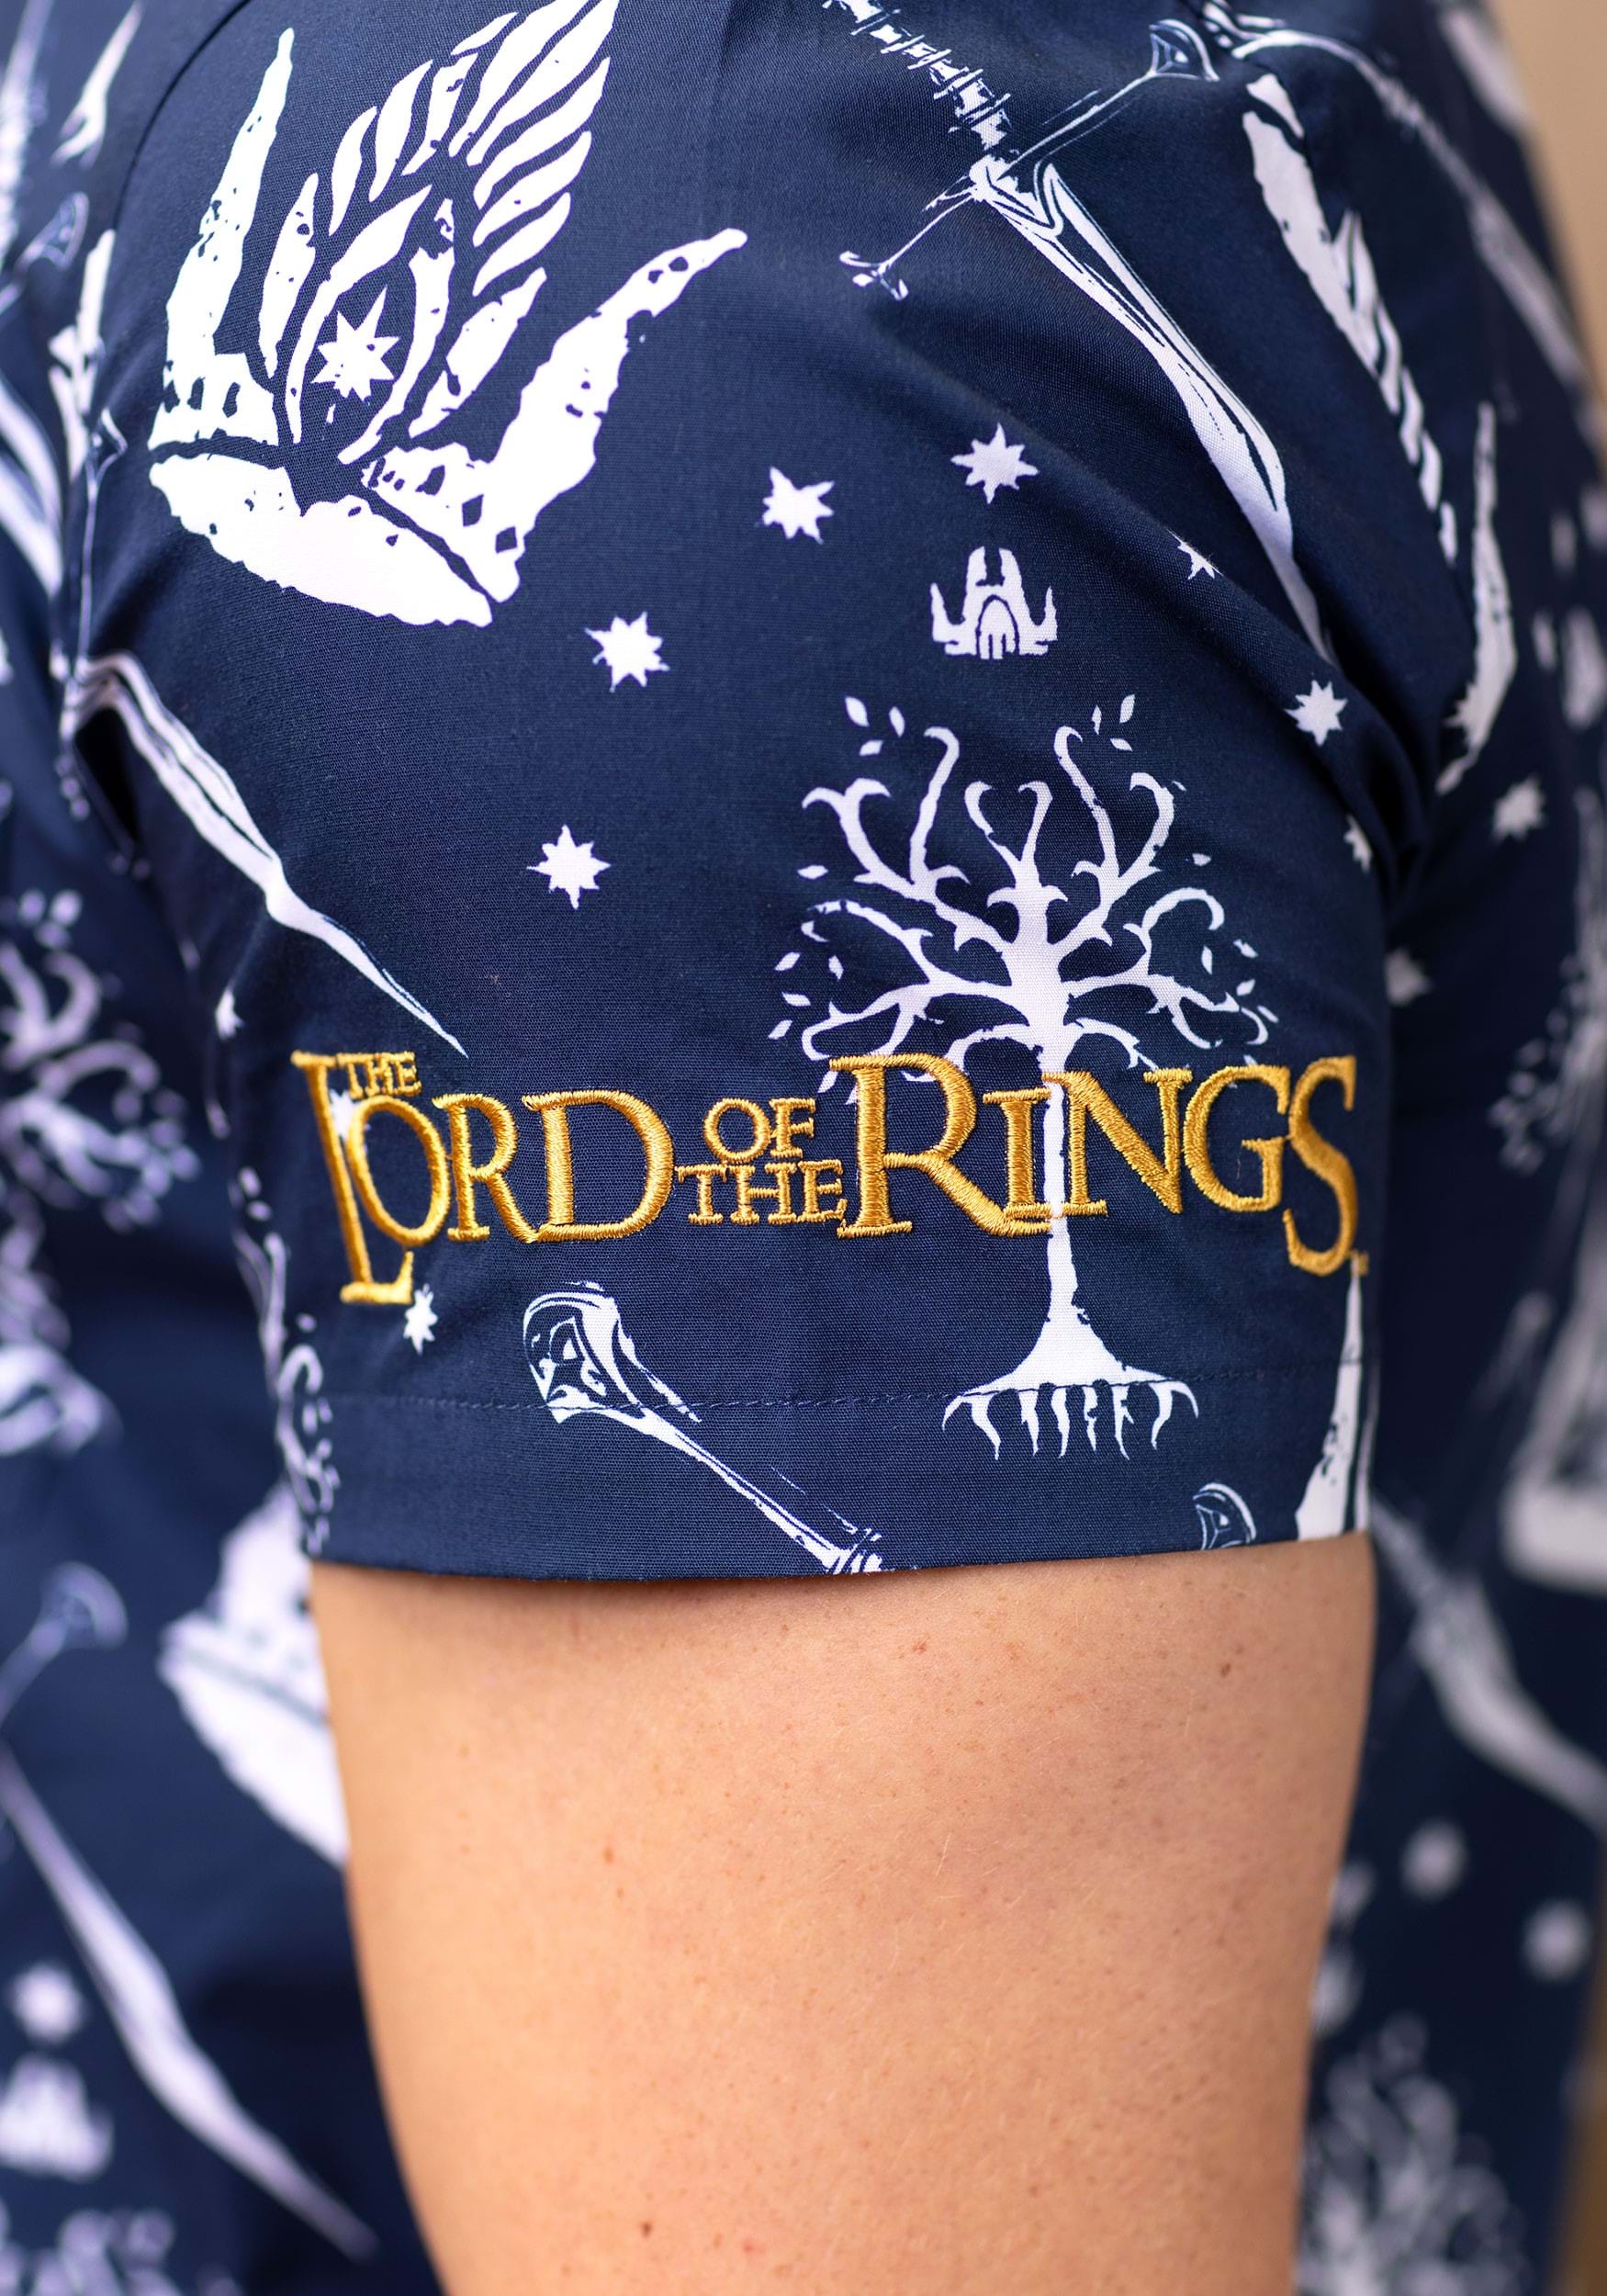 The King's Return Lord Of The Rings Men's Shirt